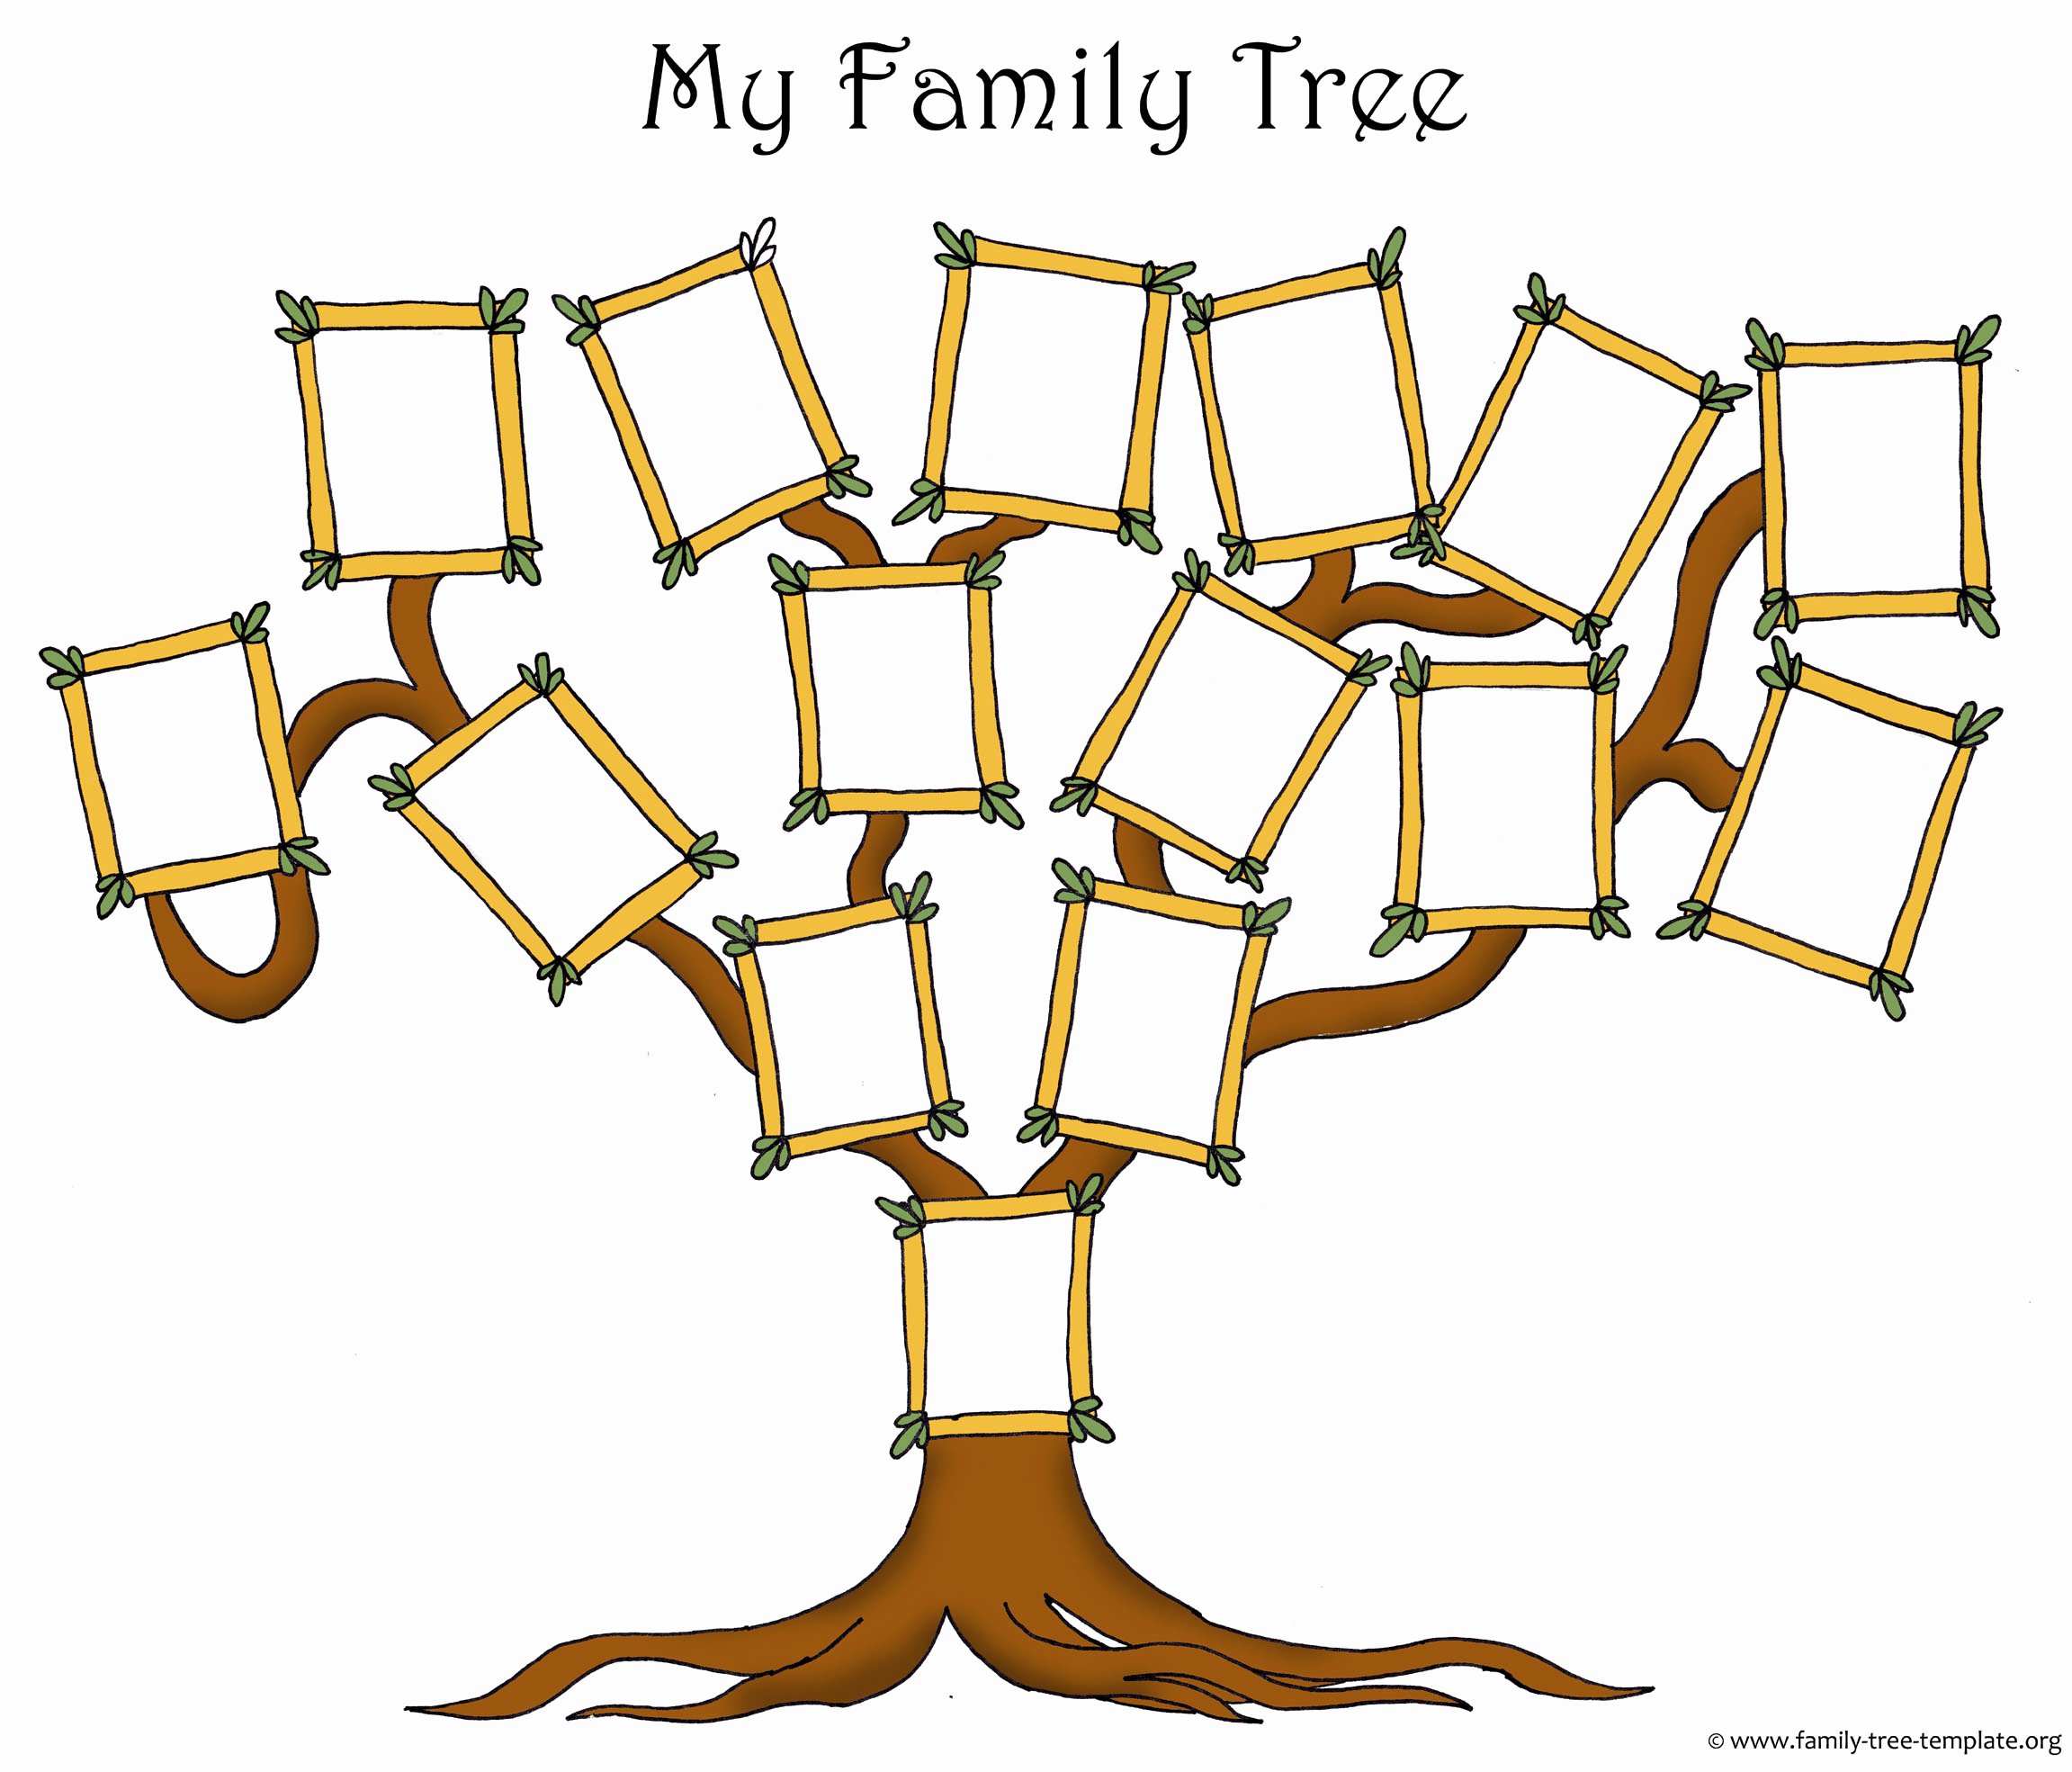 Blank Family Tree Chart Best Of Free Family Tree Template Designs for Making Ancestry Charts